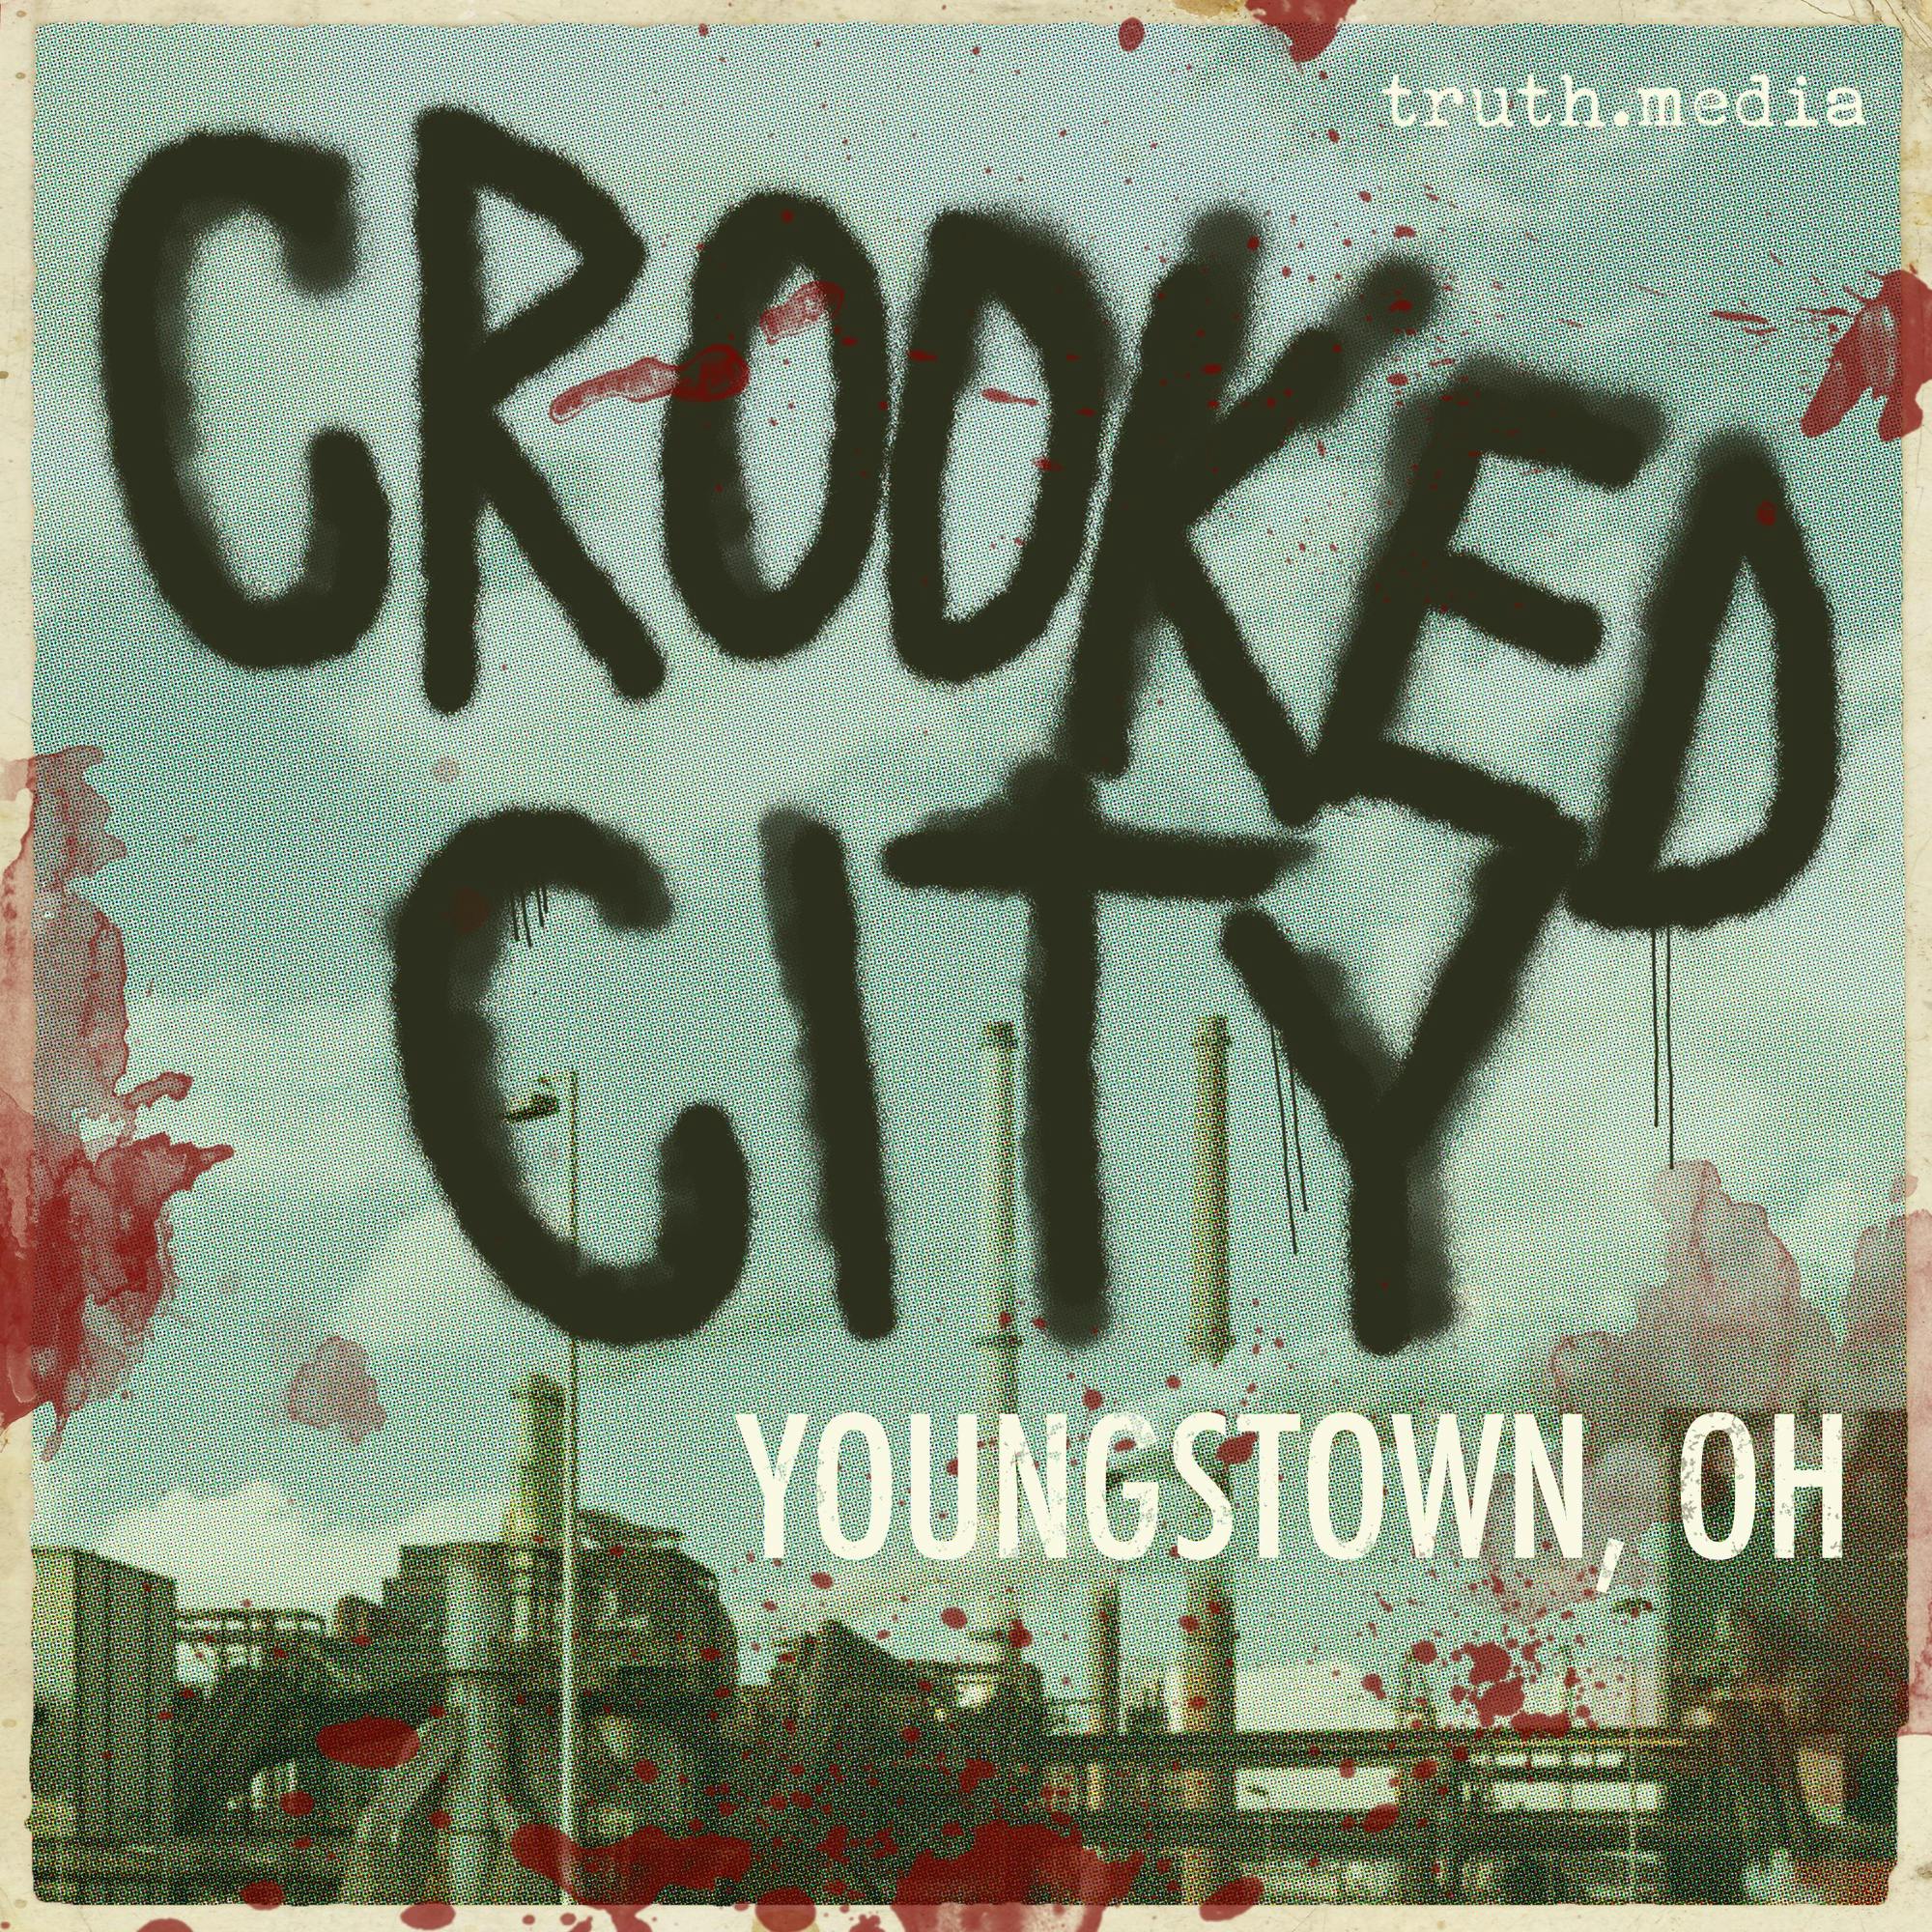 Crooked City: Youngstown, OH by truth.media